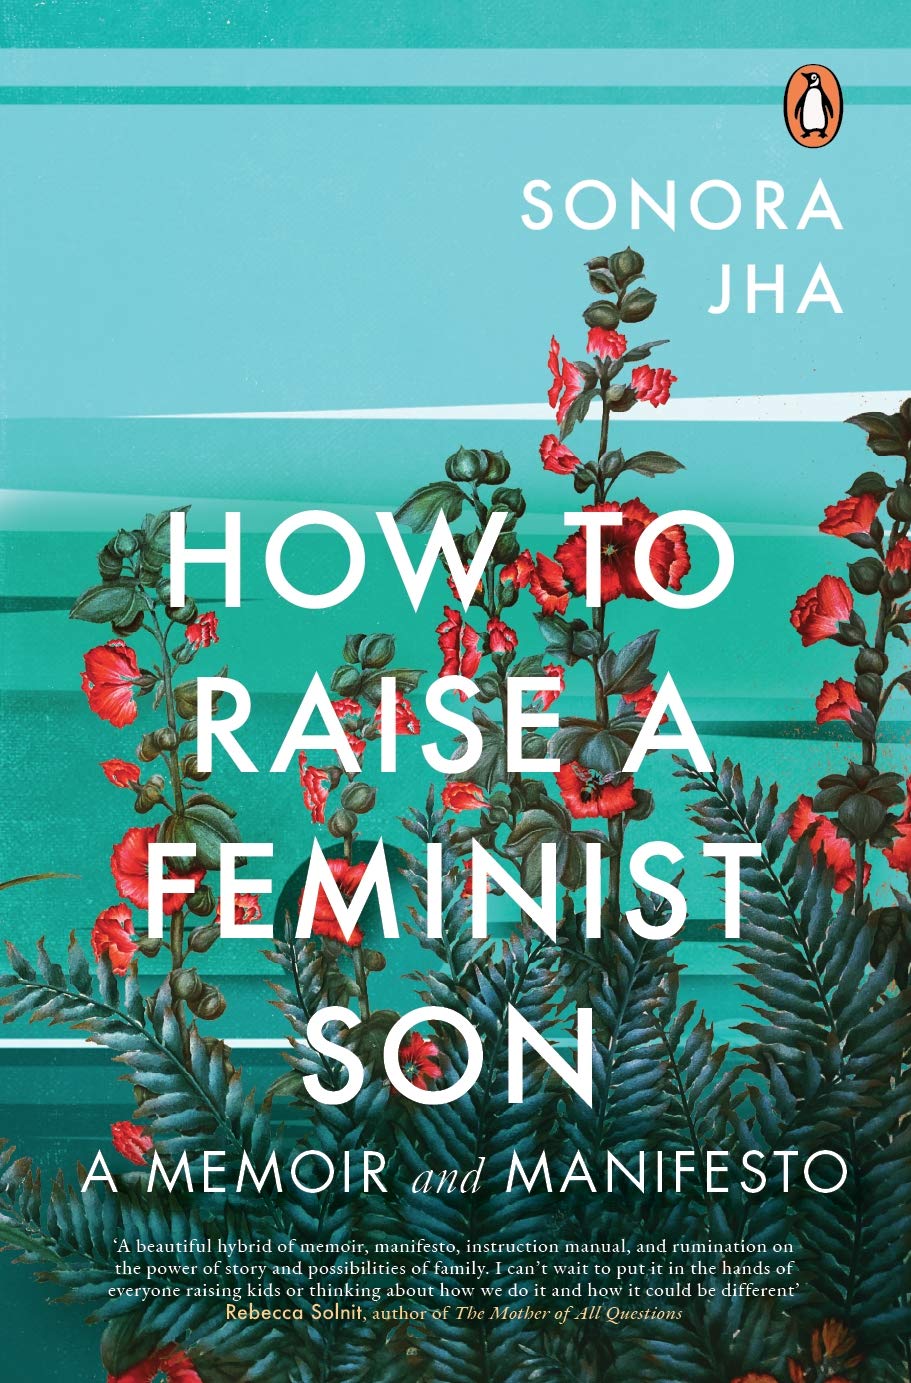 BOOK REVIEW: How to Raise a Feminist Son by Sonora Jha